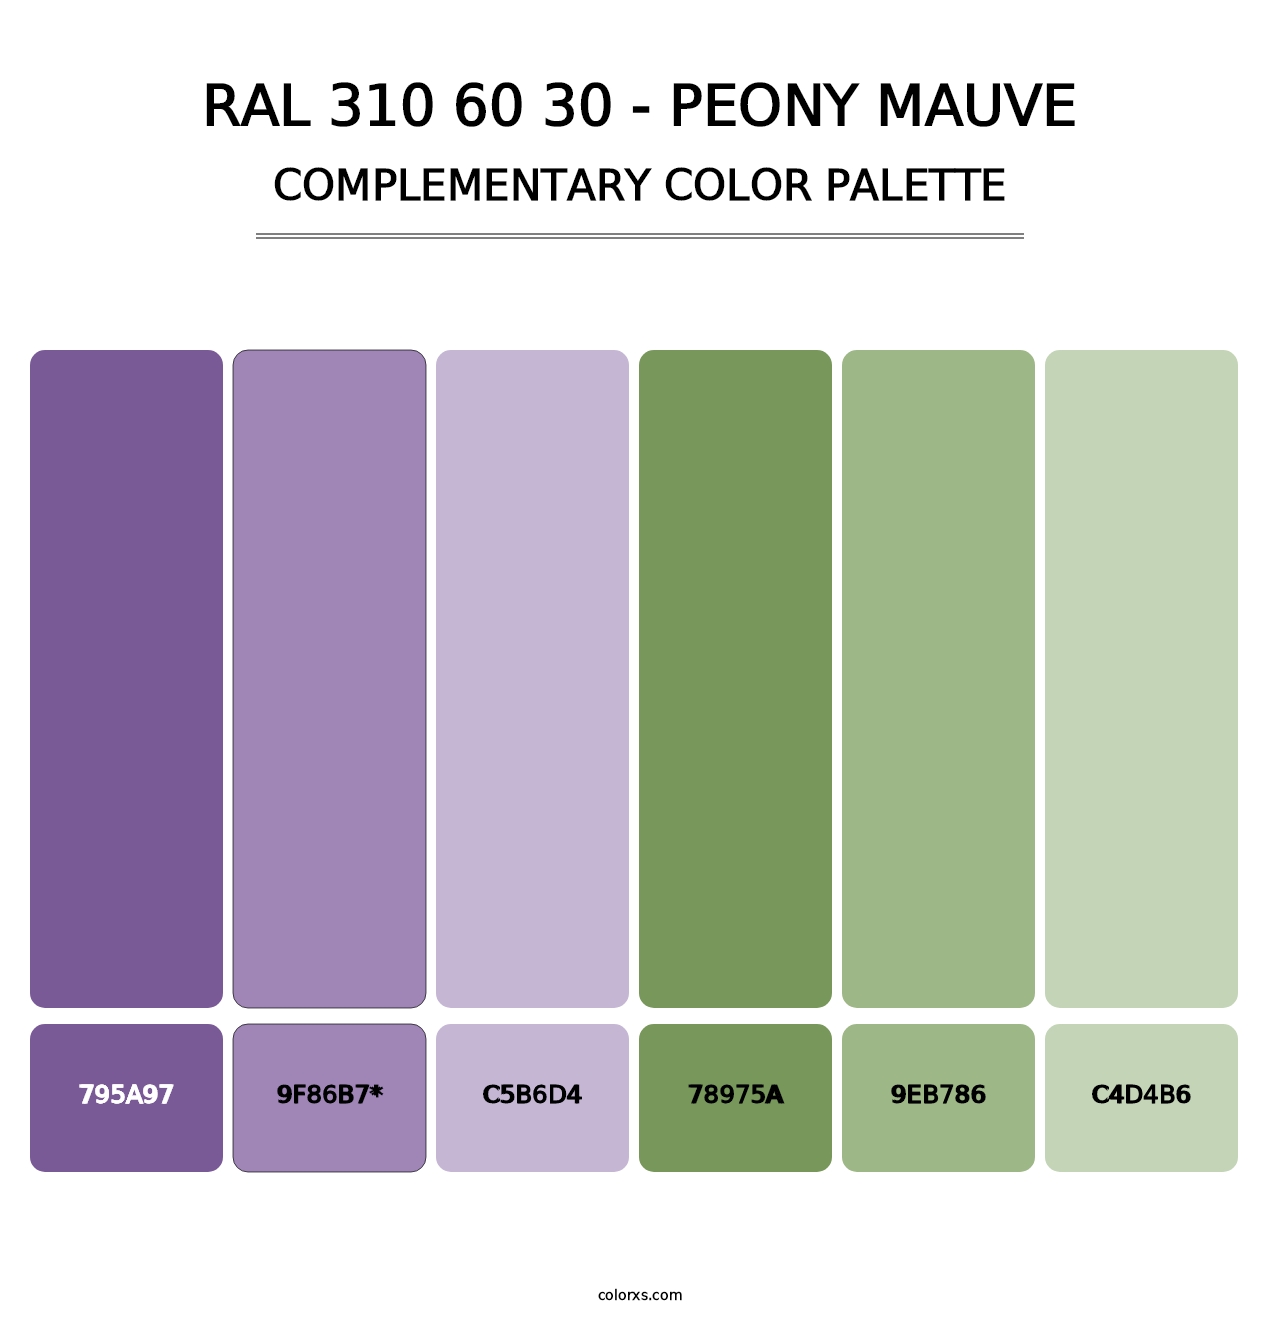 RAL 310 60 30 - Peony Mauve - Complementary Color Palette